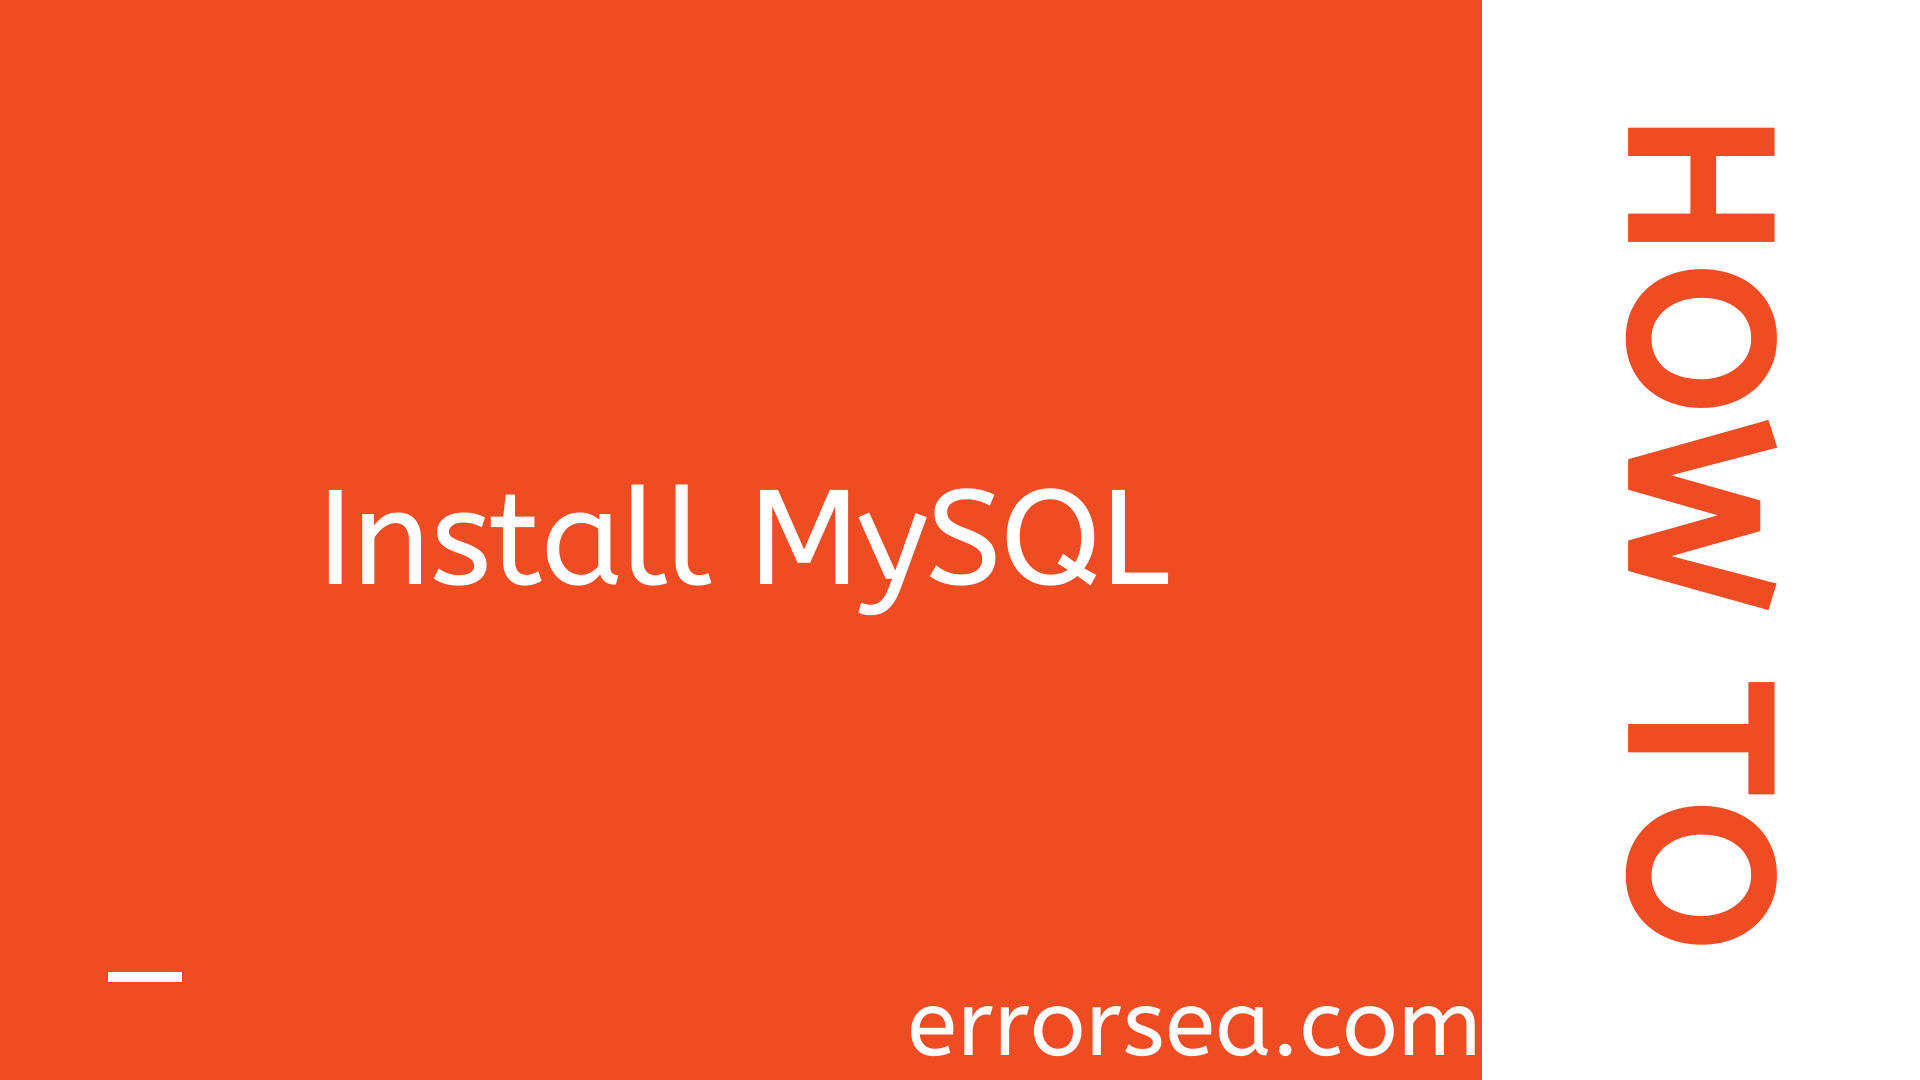 How to Install MySQL in 3 simple steps